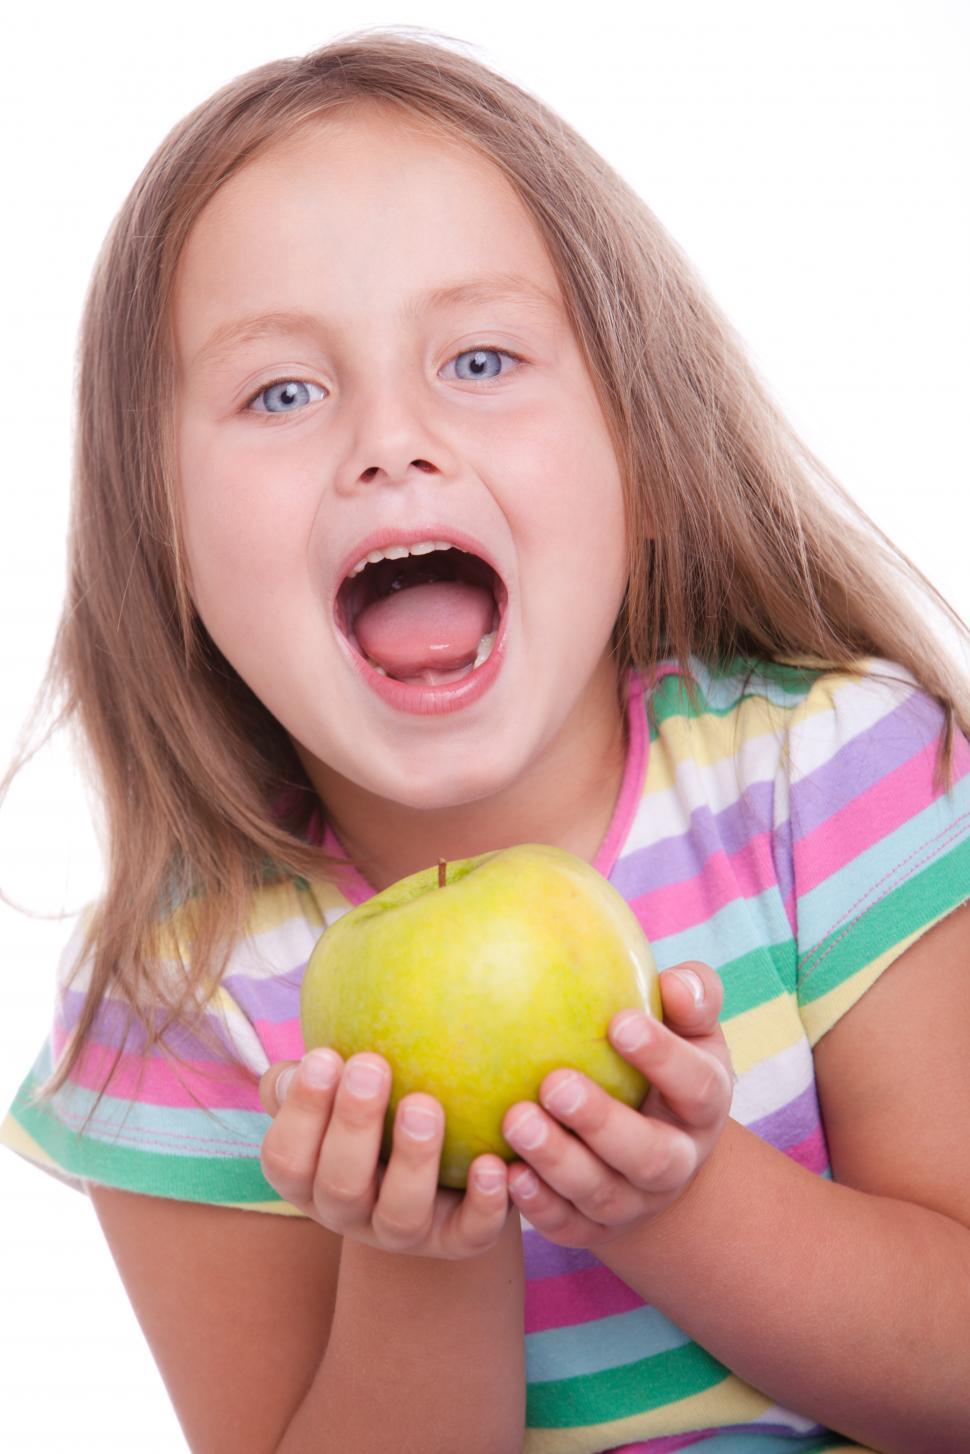 Free Image of Cute happy kid with green apple 